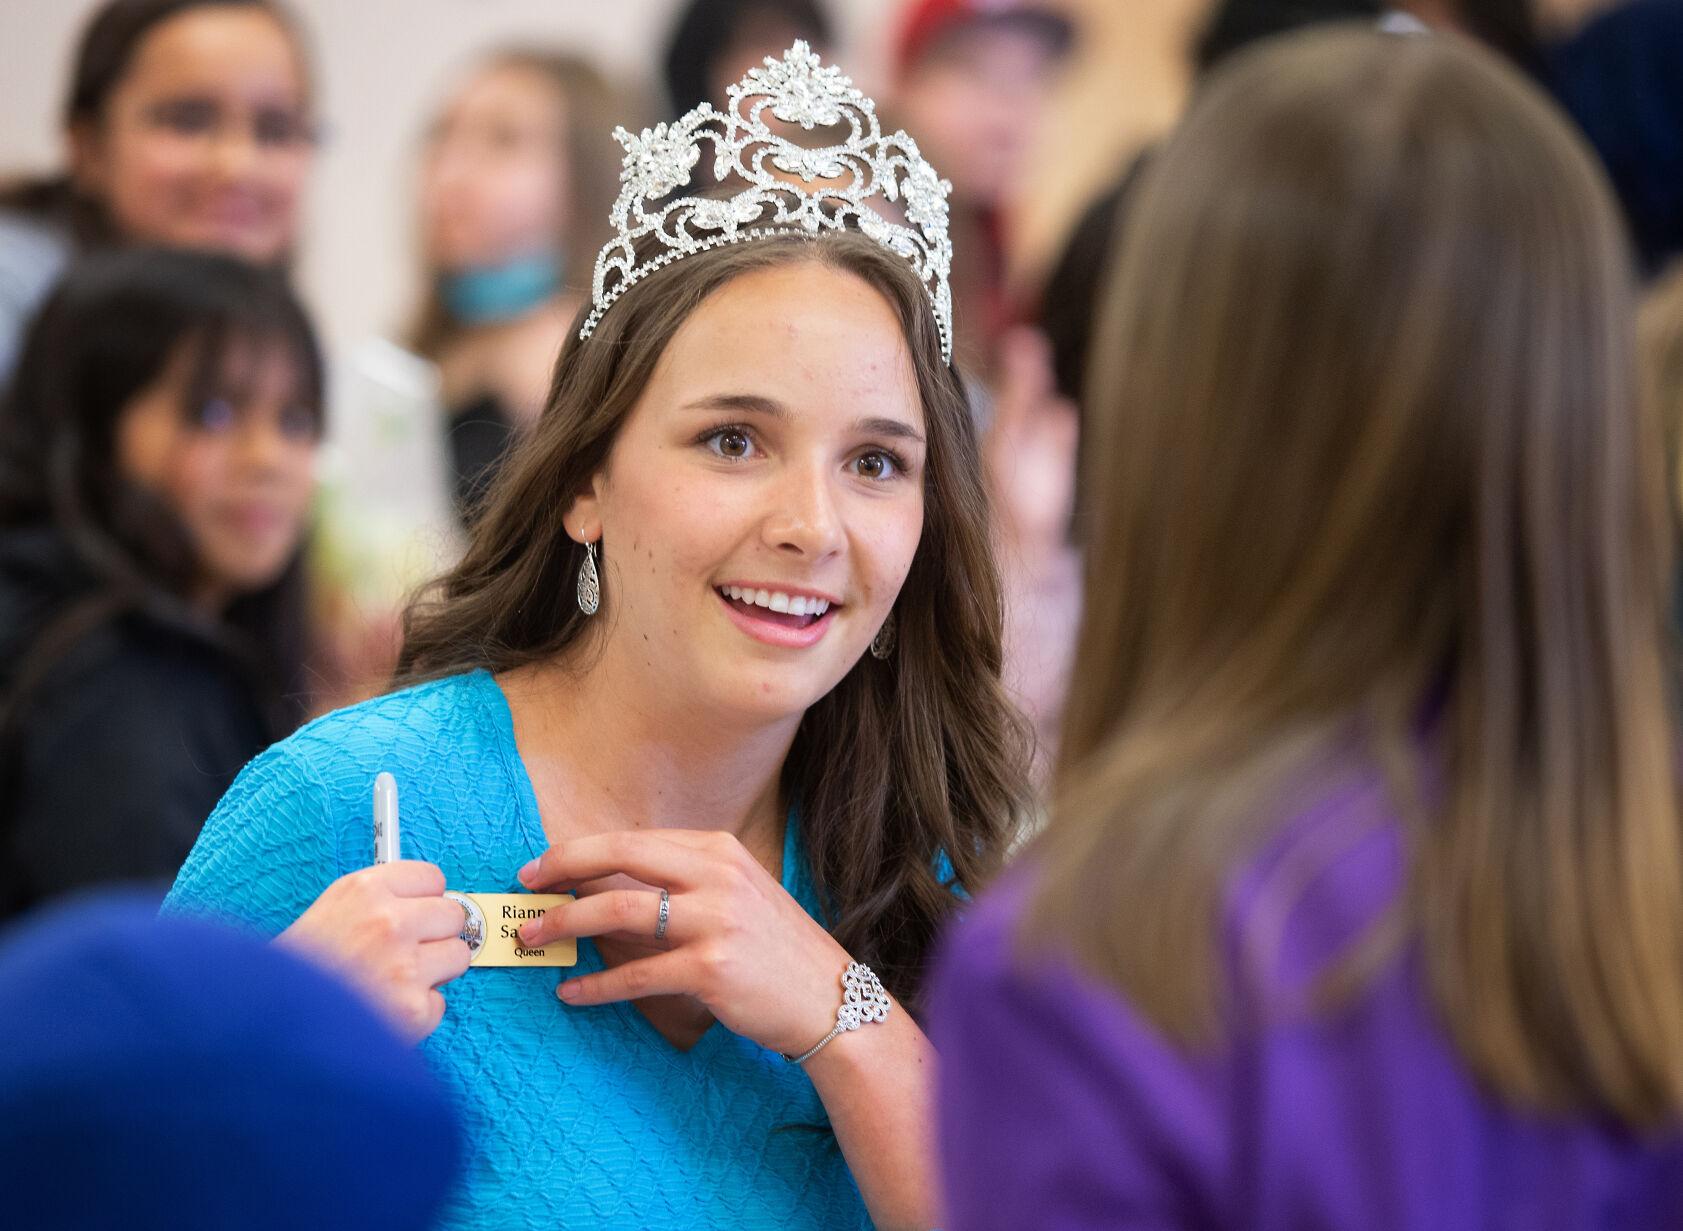 Apple Blossom Queen enjoys the moment while keeping an eye on the